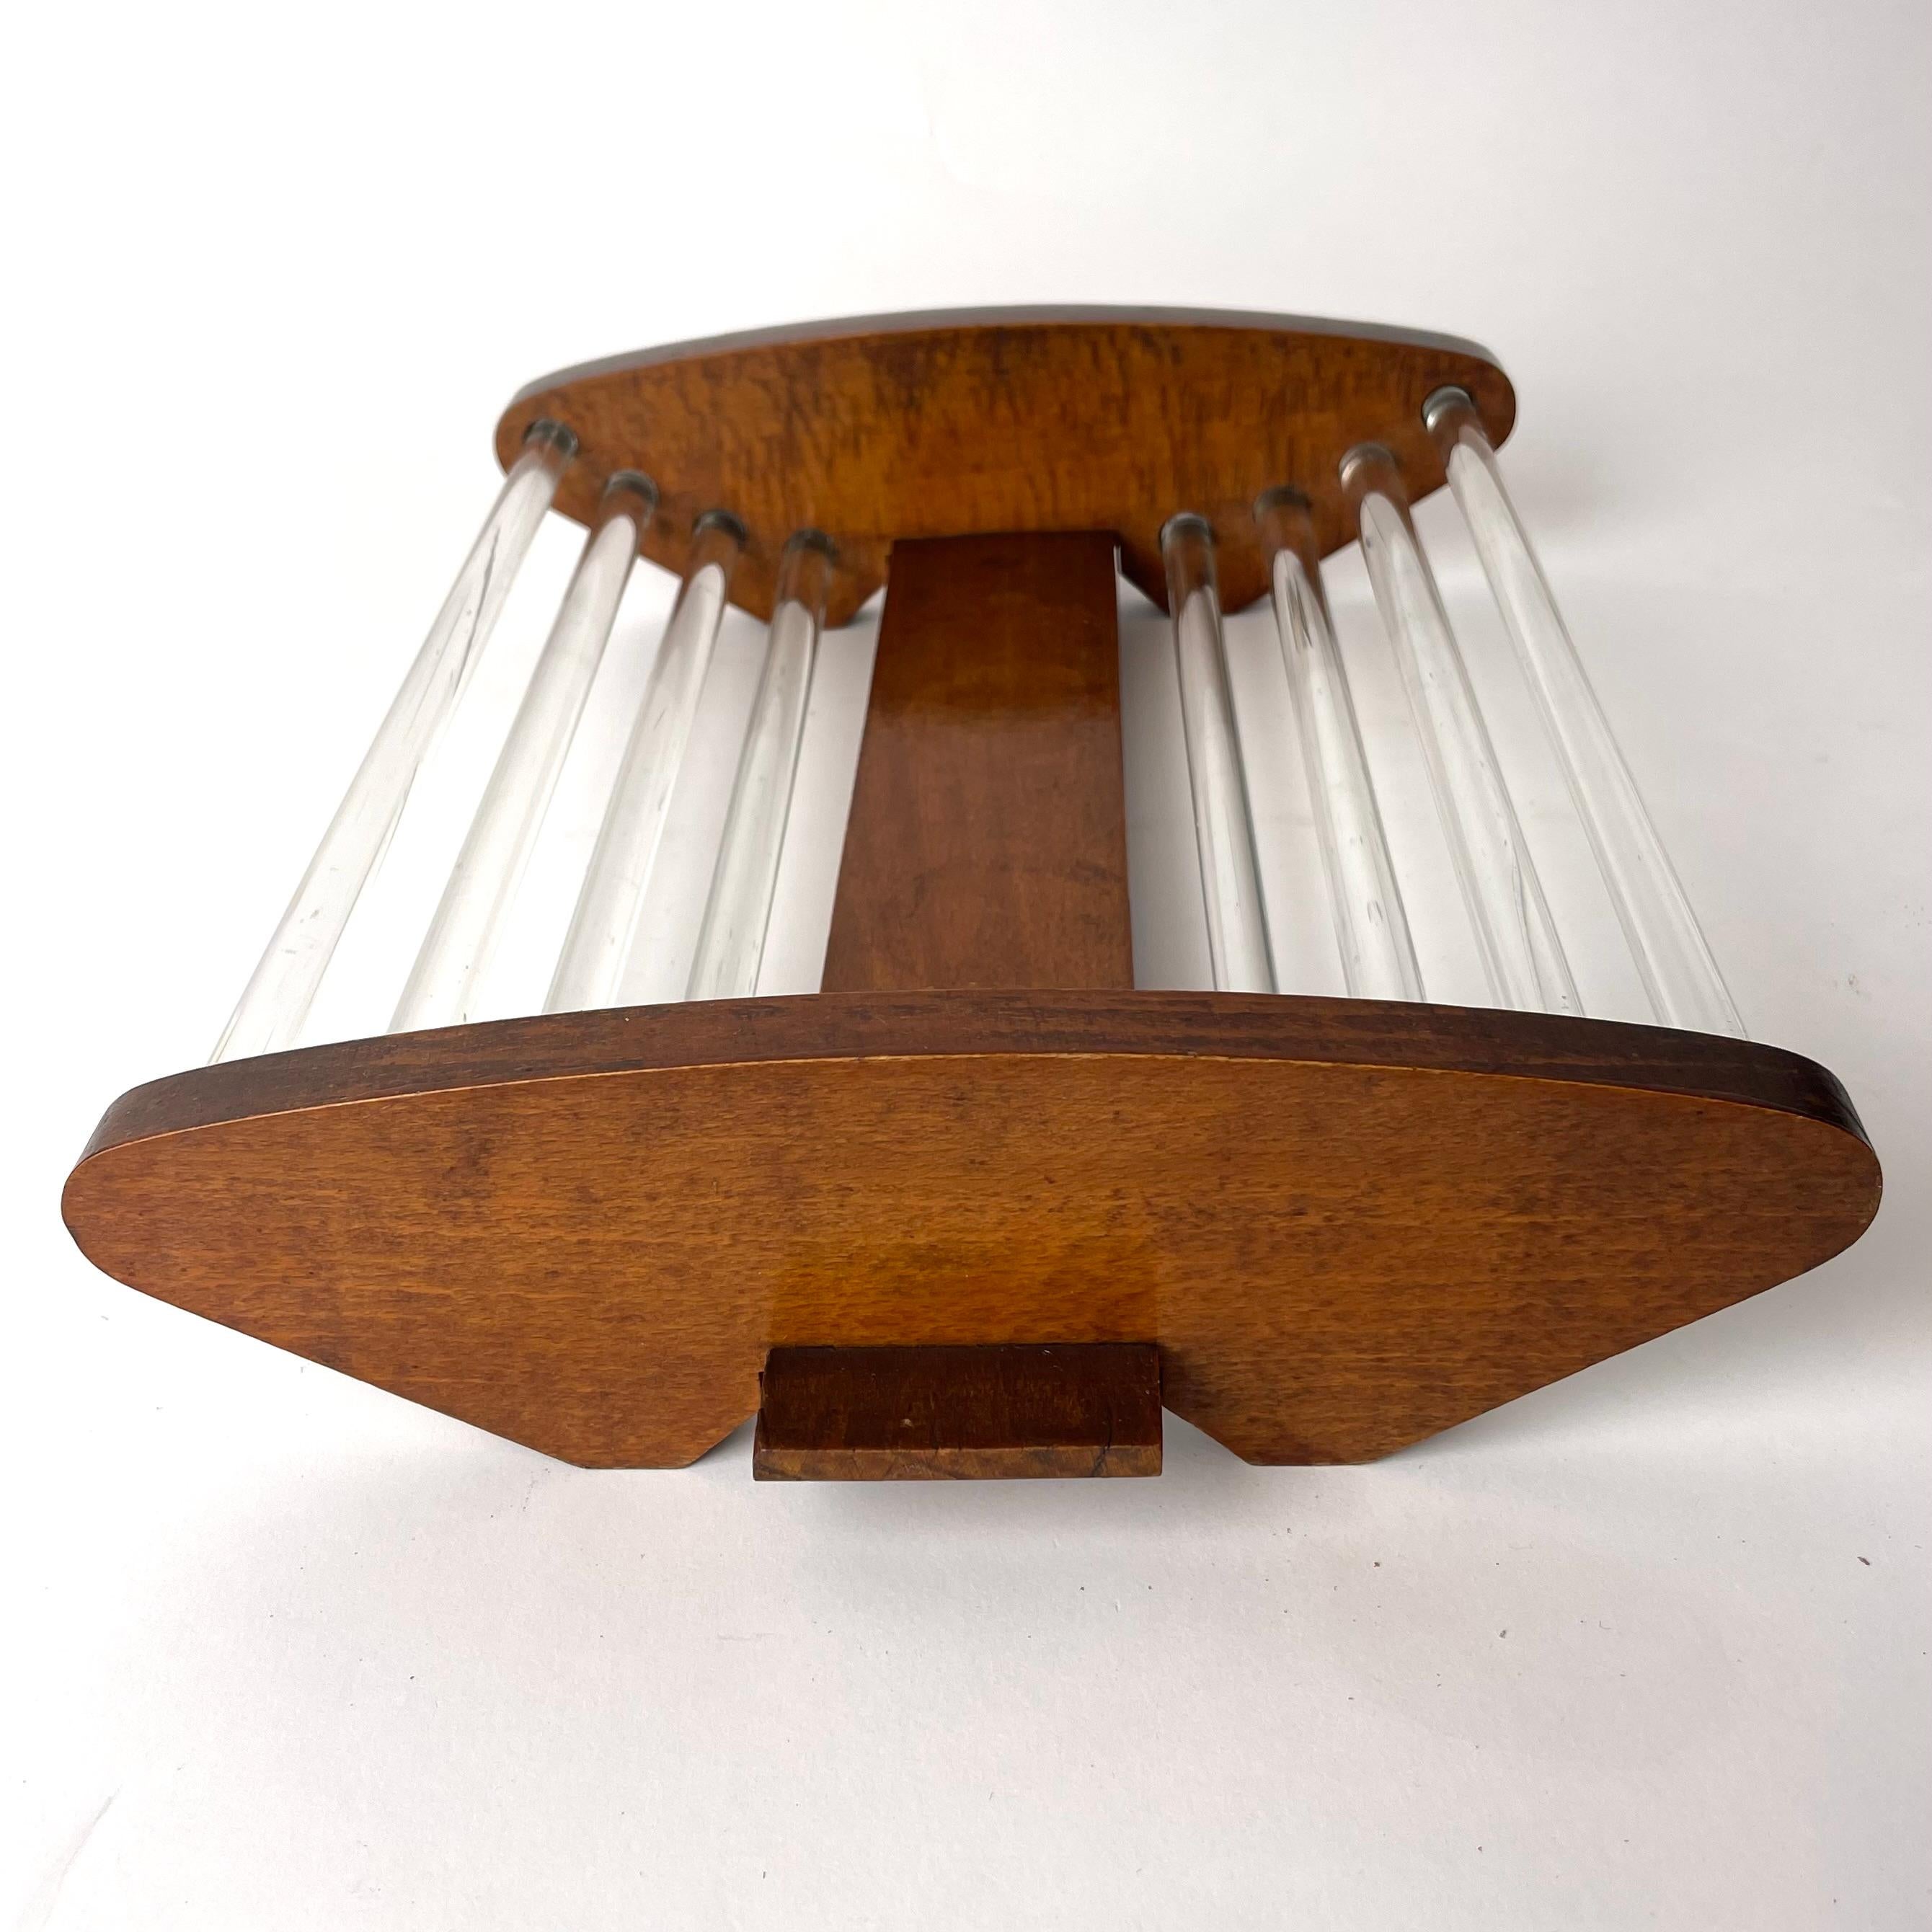 French Art Deco Fruit Platter, Beech Wood with Glass Rods, 1920s For Sale 2